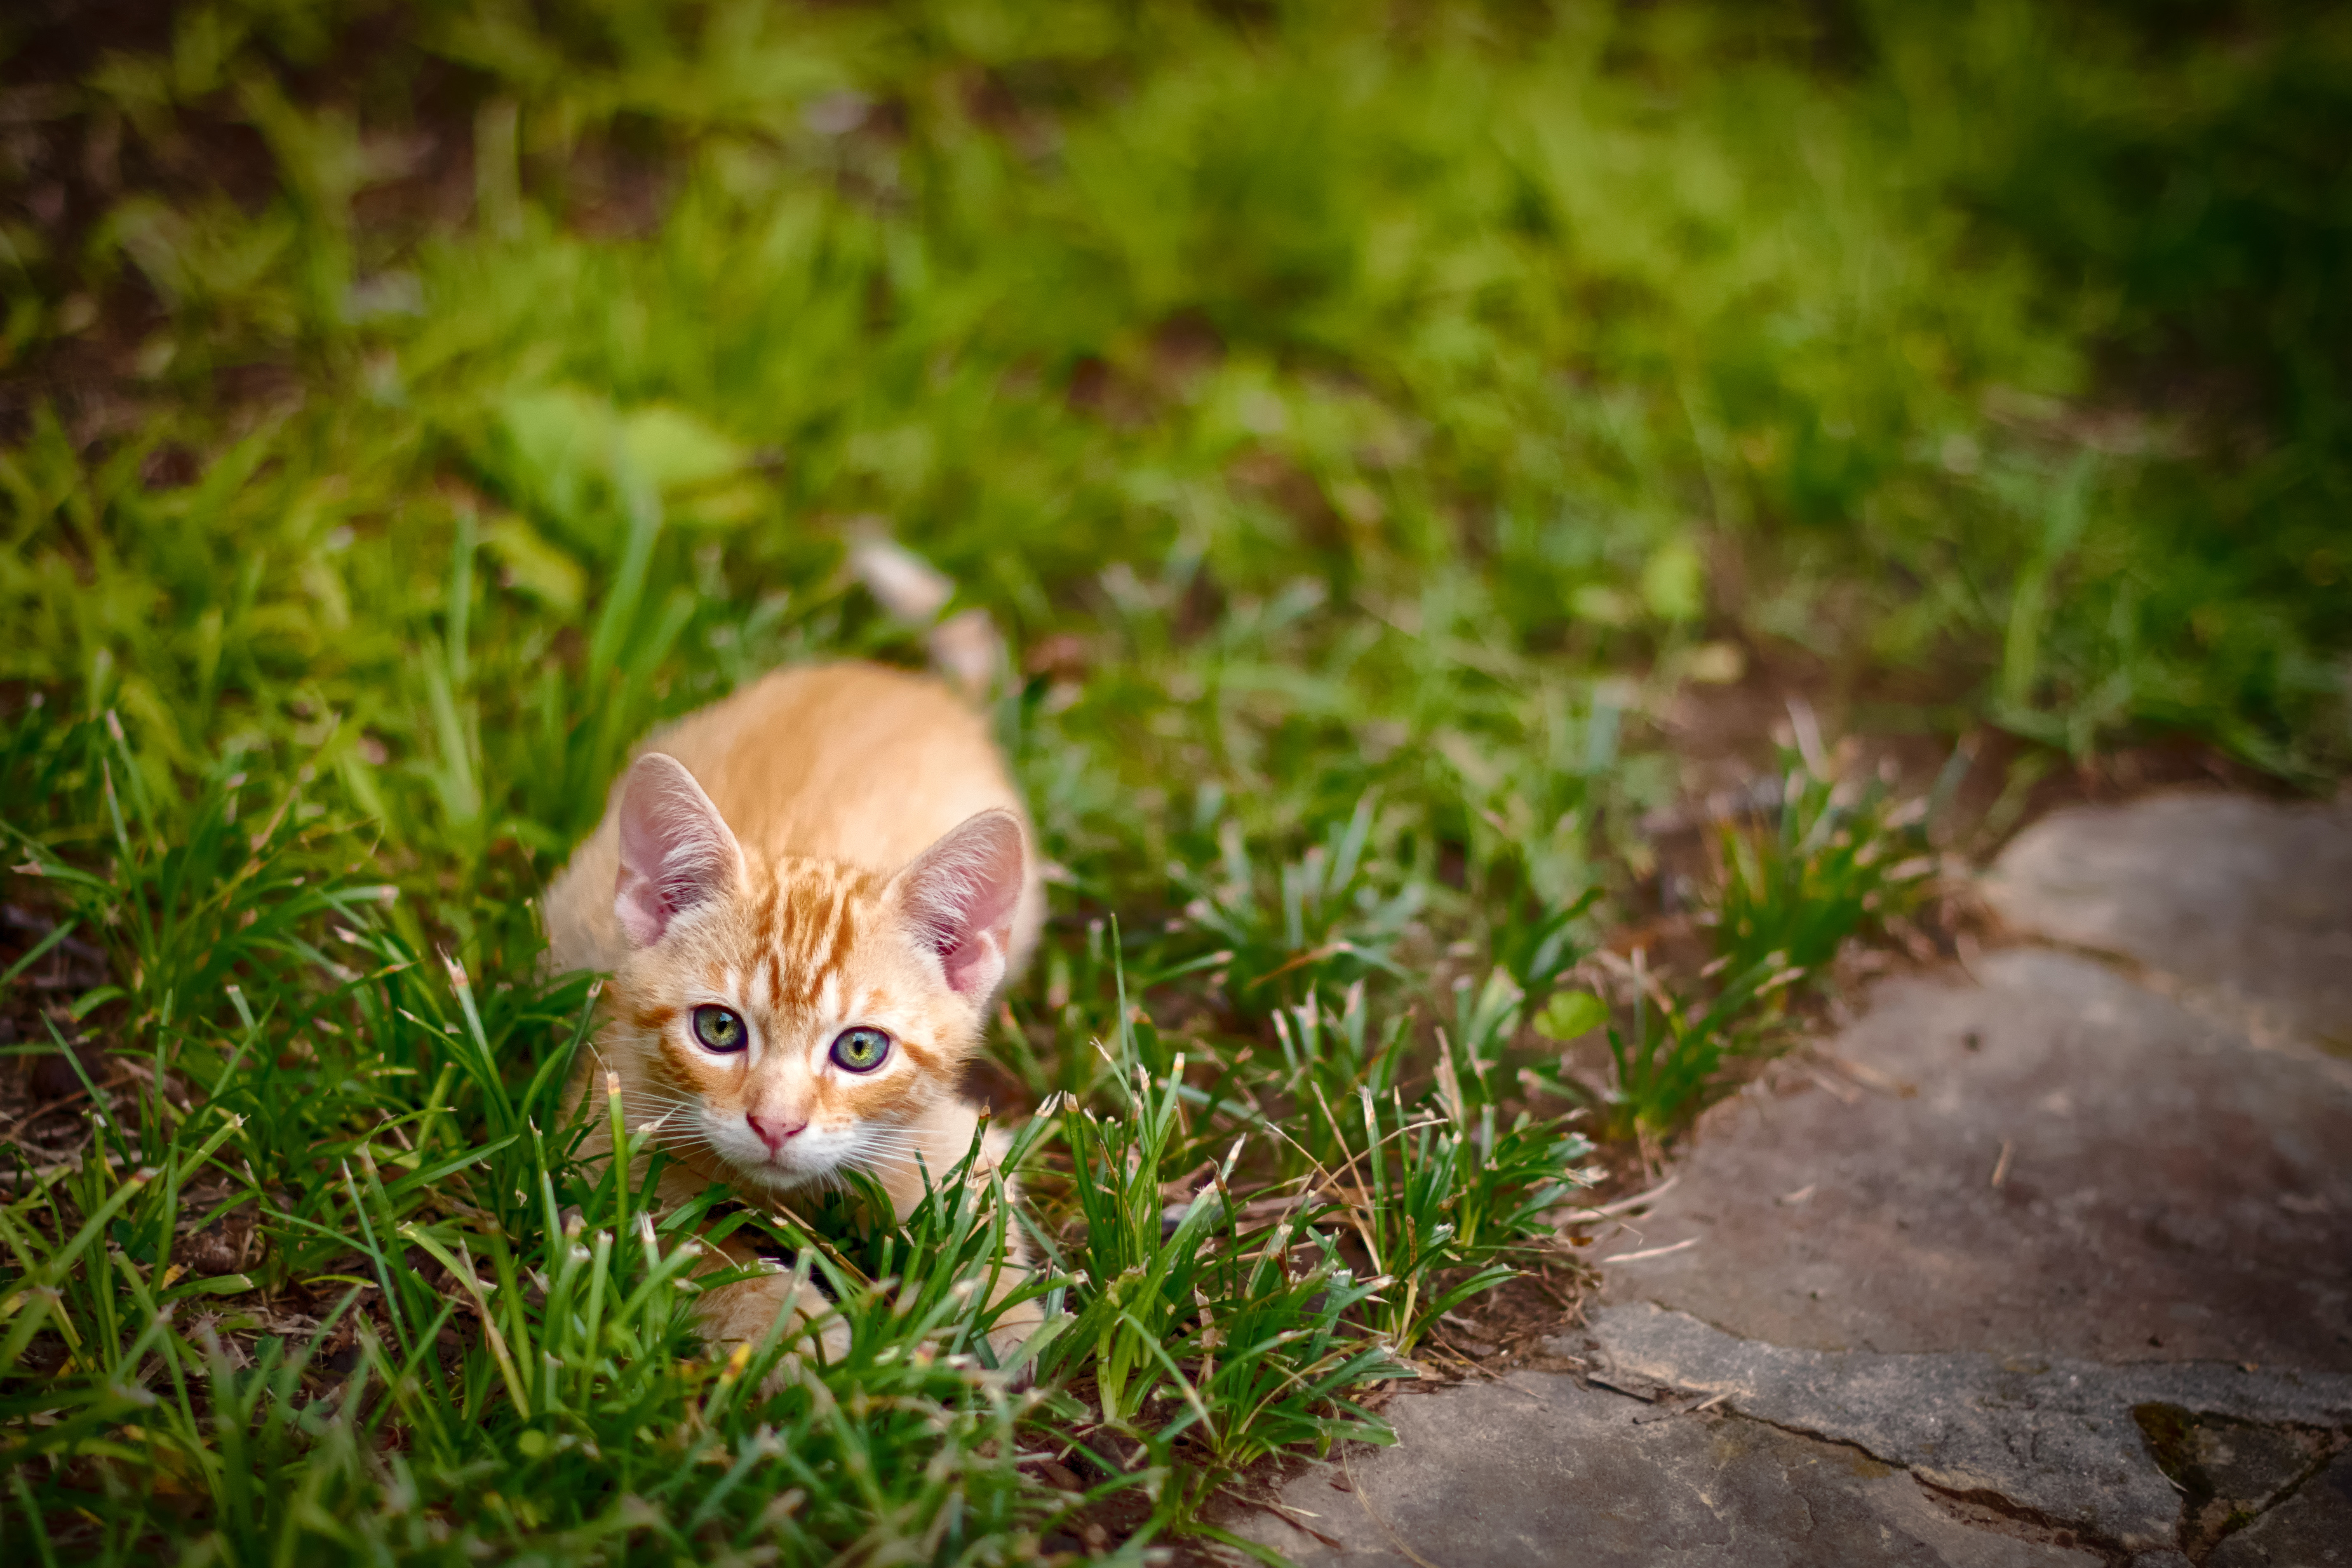 Small Kitten Getting ready to pounce  image Free stock 